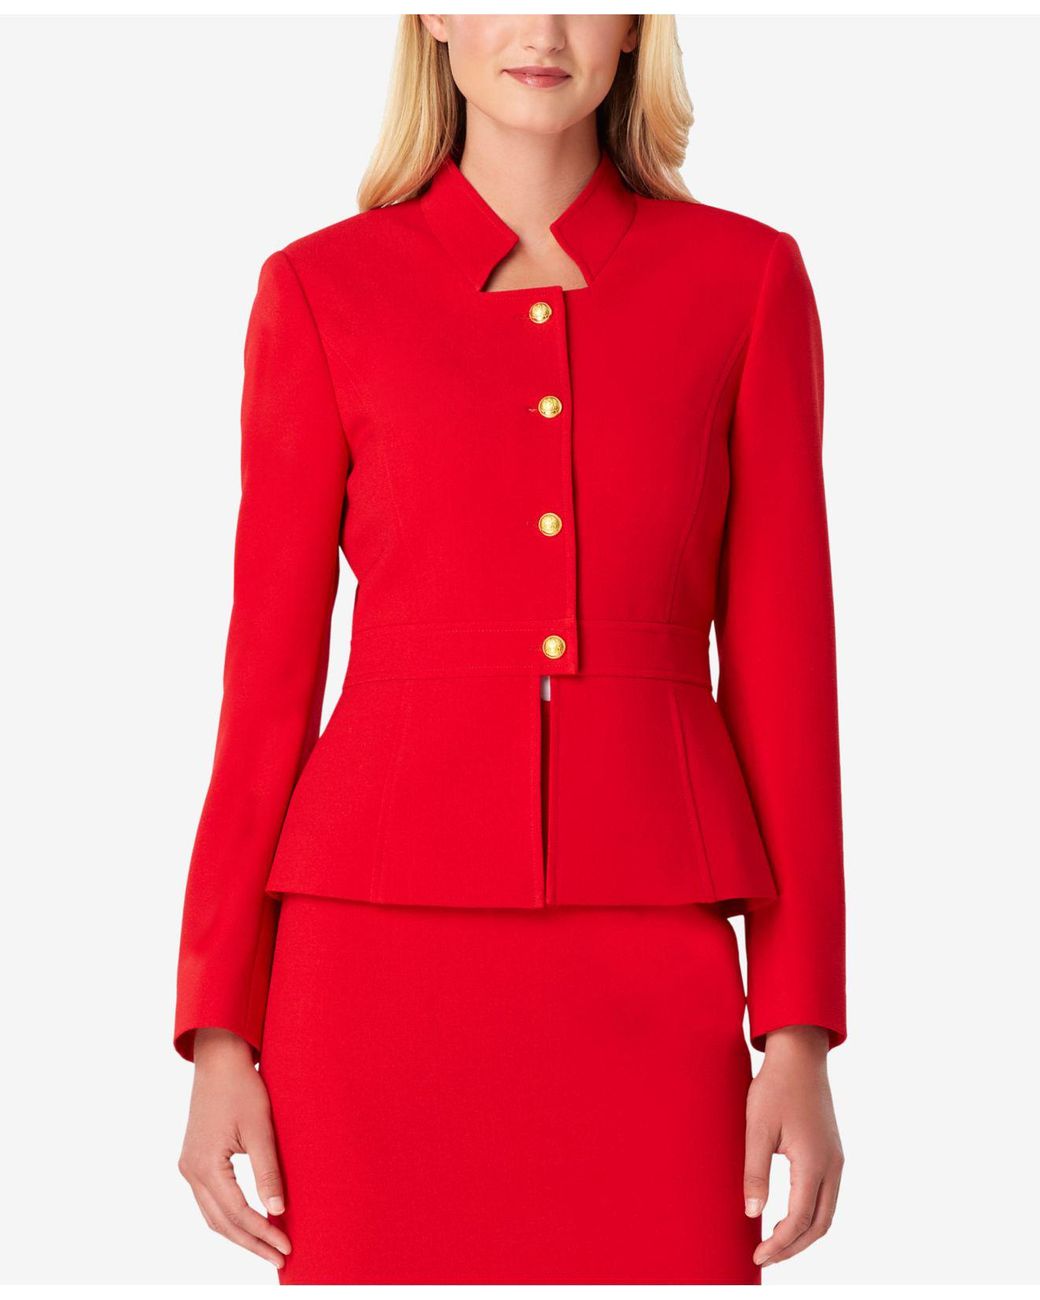 Kate Middleton's peplum jacket is now at the top of our spring wishlist:  here's 5 you can shop now | HELLO!